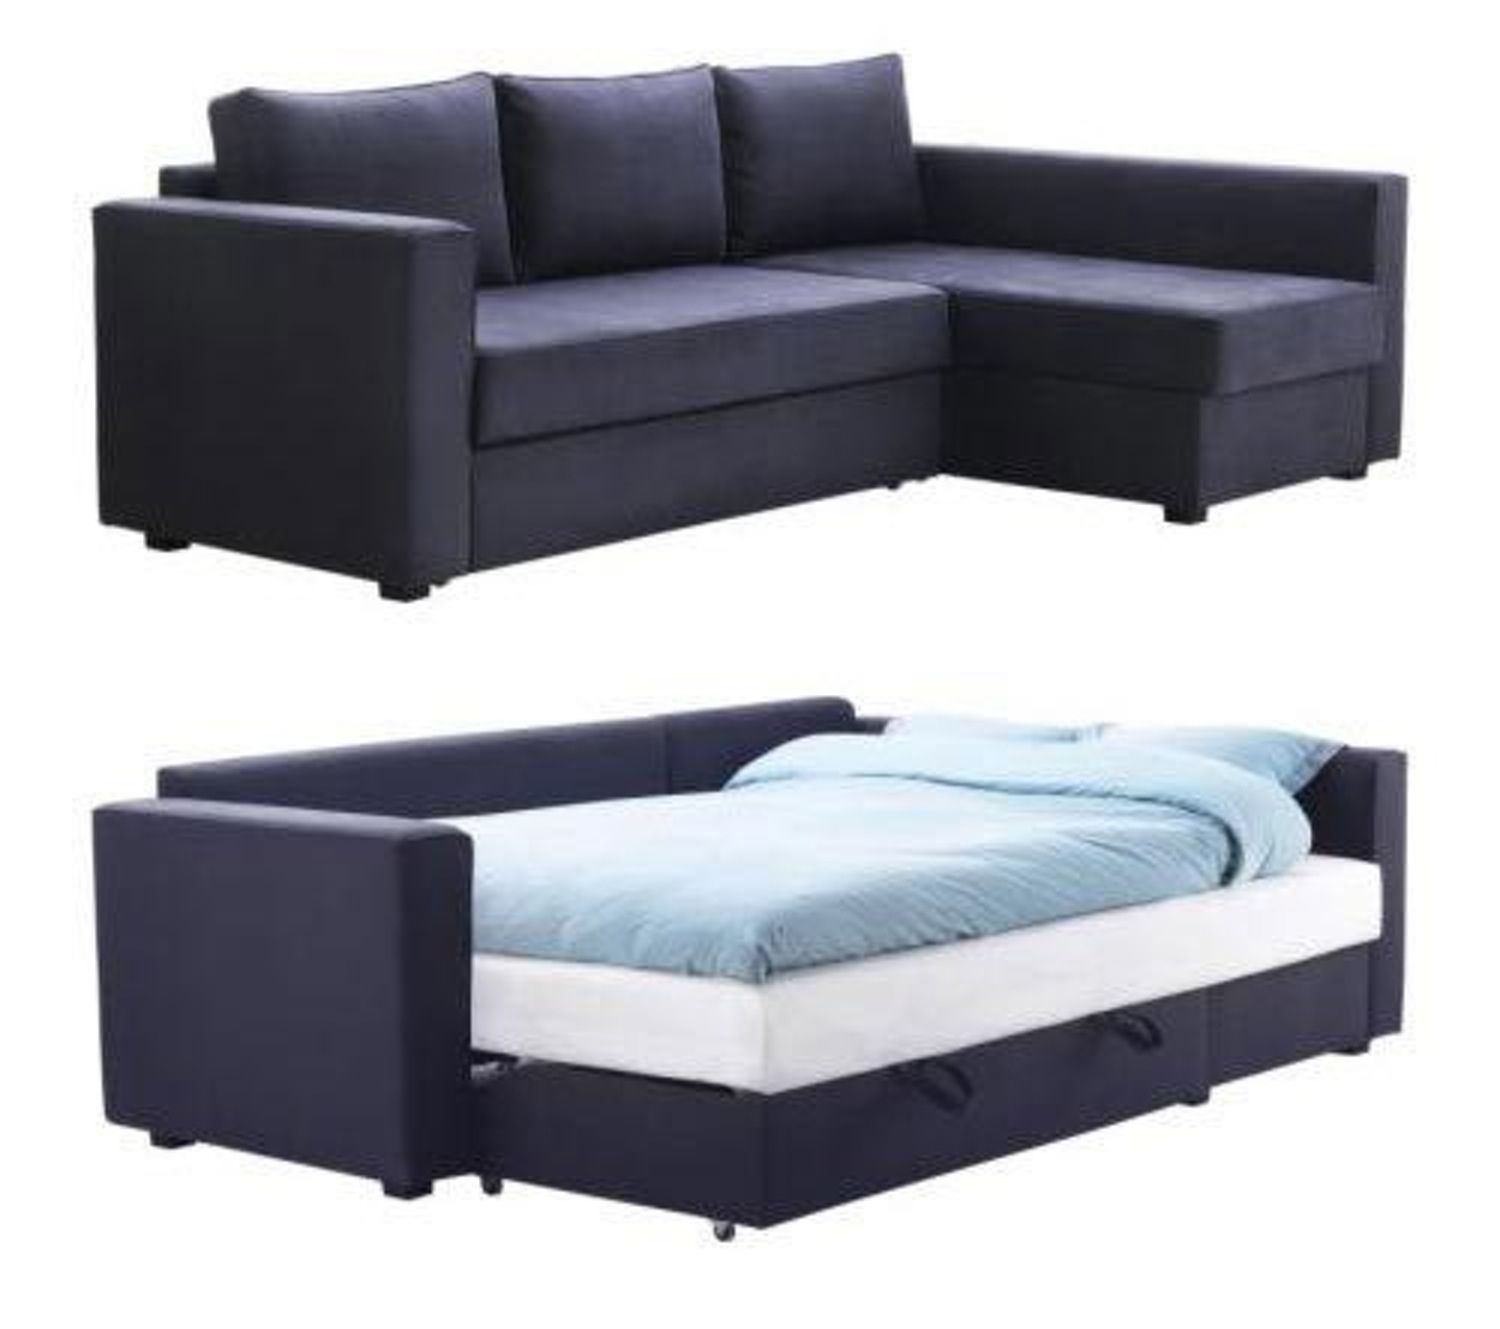 Manstad Sectional Sofa Bed & Storage From Ikea | Sofa Sleeper, Bed Throughout Sectional Sofas At Ikea (View 6 of 15)